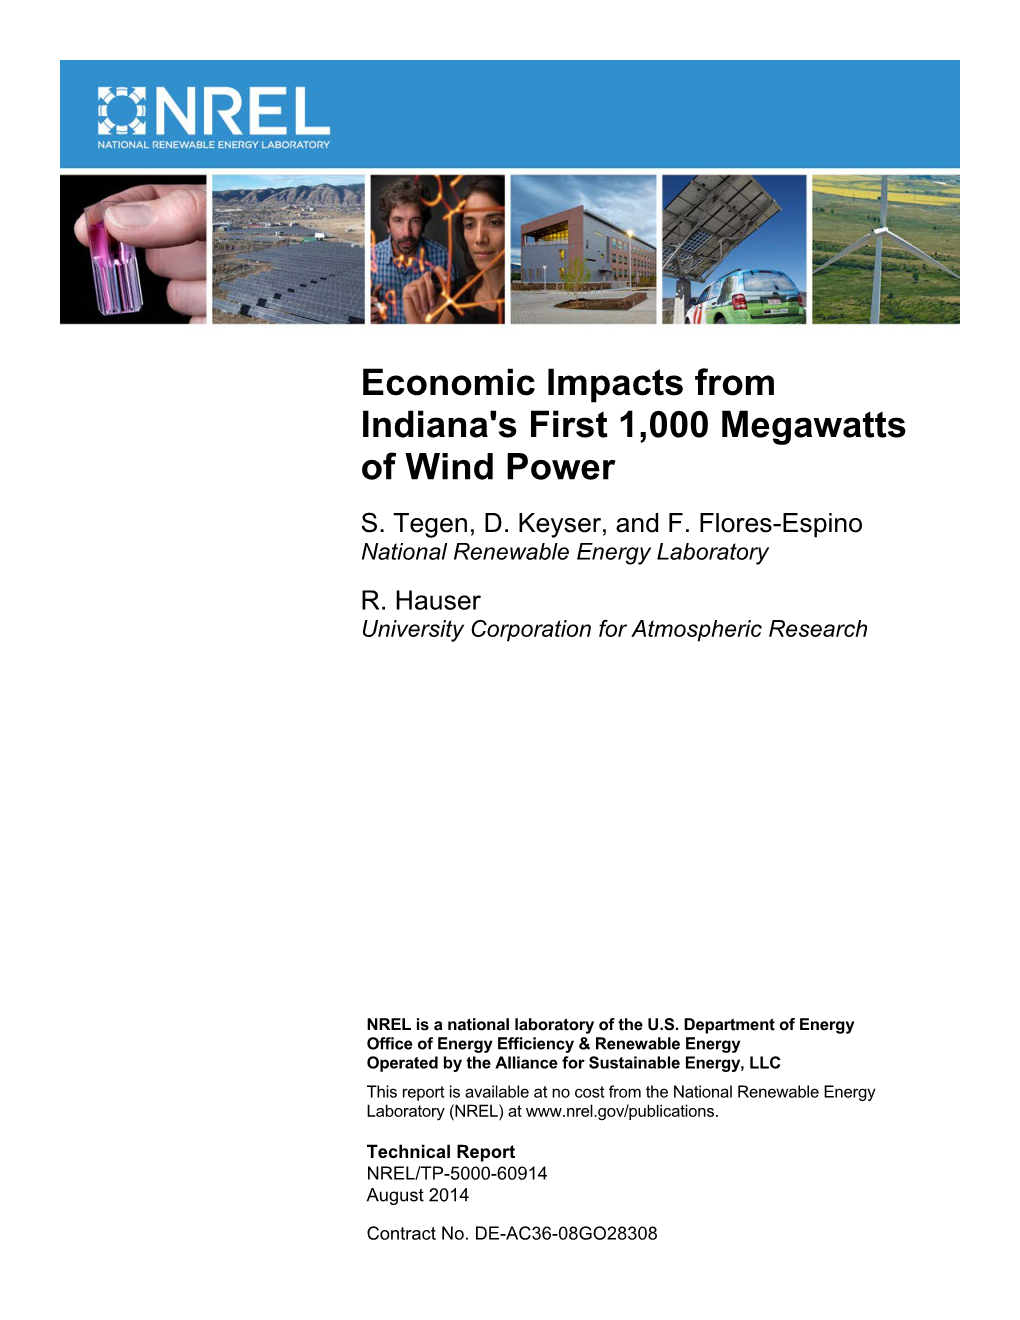 Economic Impacts from Indiana's First 1,000 Megawatts of Wind Power S